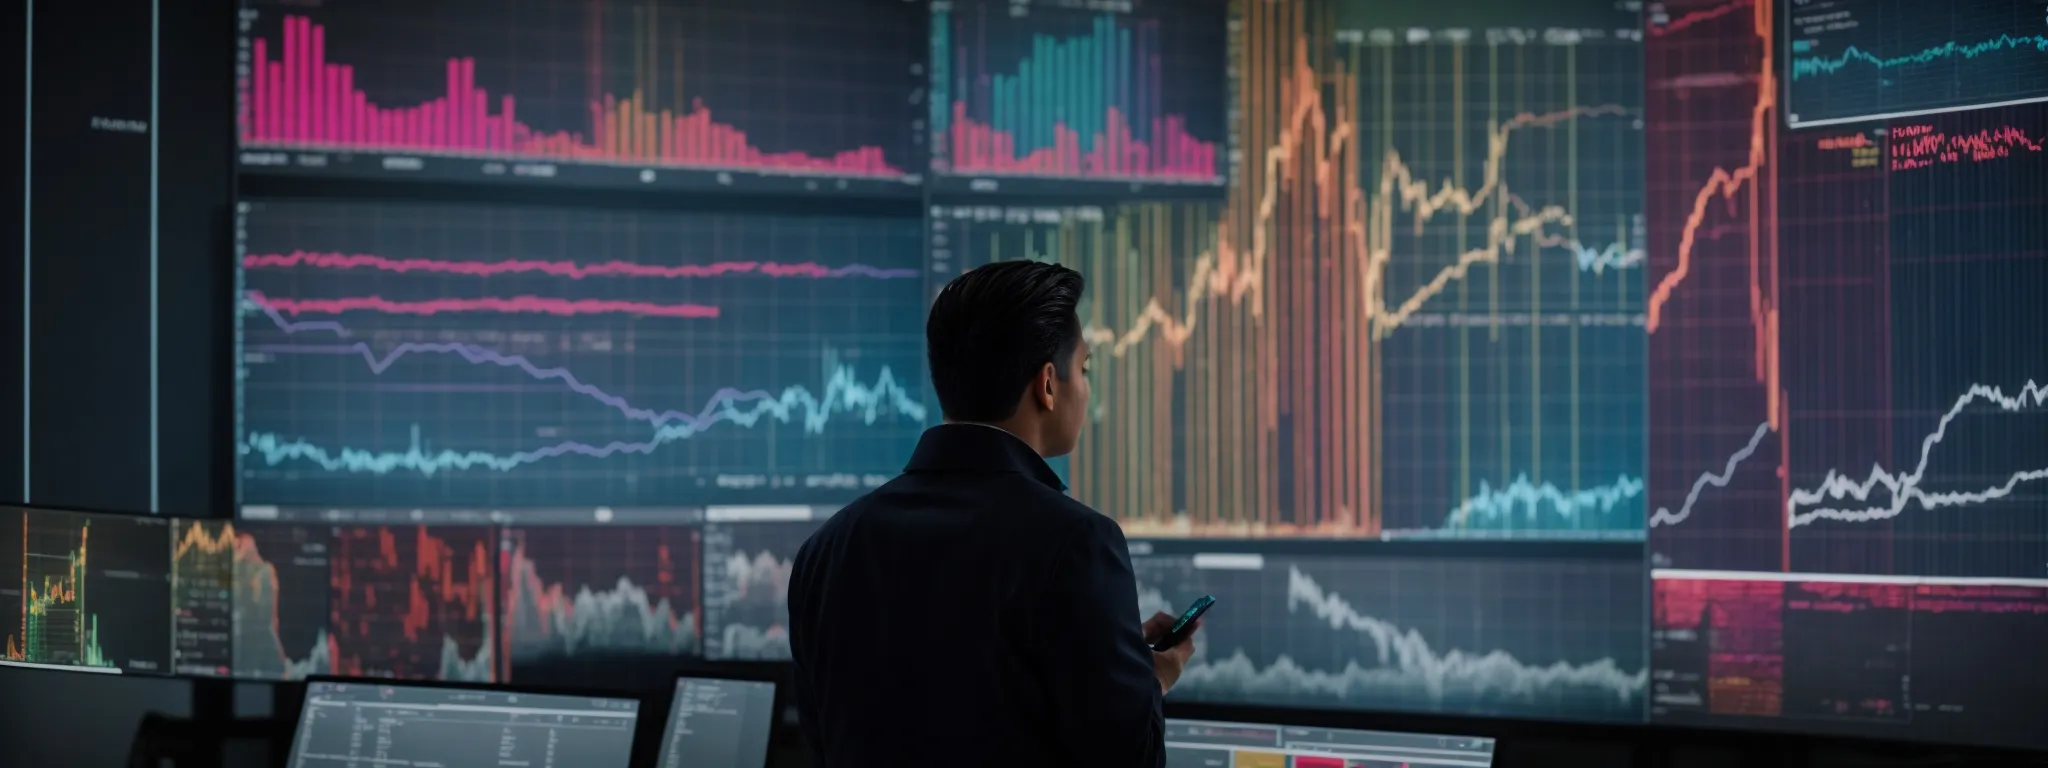 a strategist gazes intently at a large screen displaying colorful graphs and keyword trend analytics.